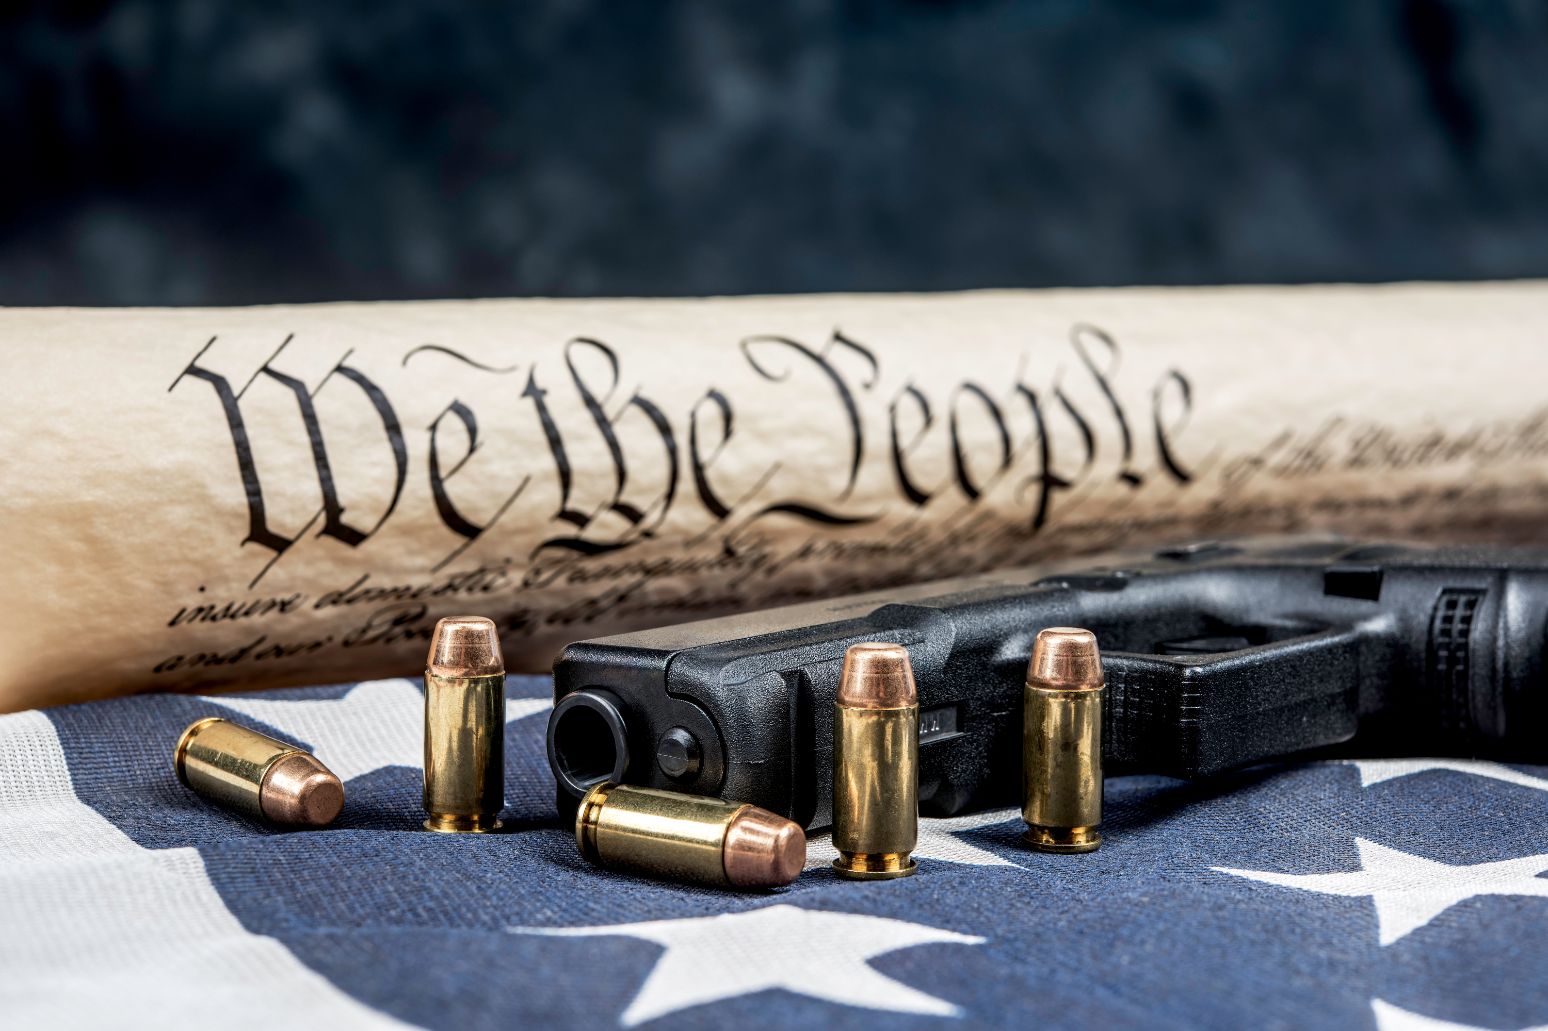 United States Constitution, Flag, Gun and Bullets. Second Amendment.